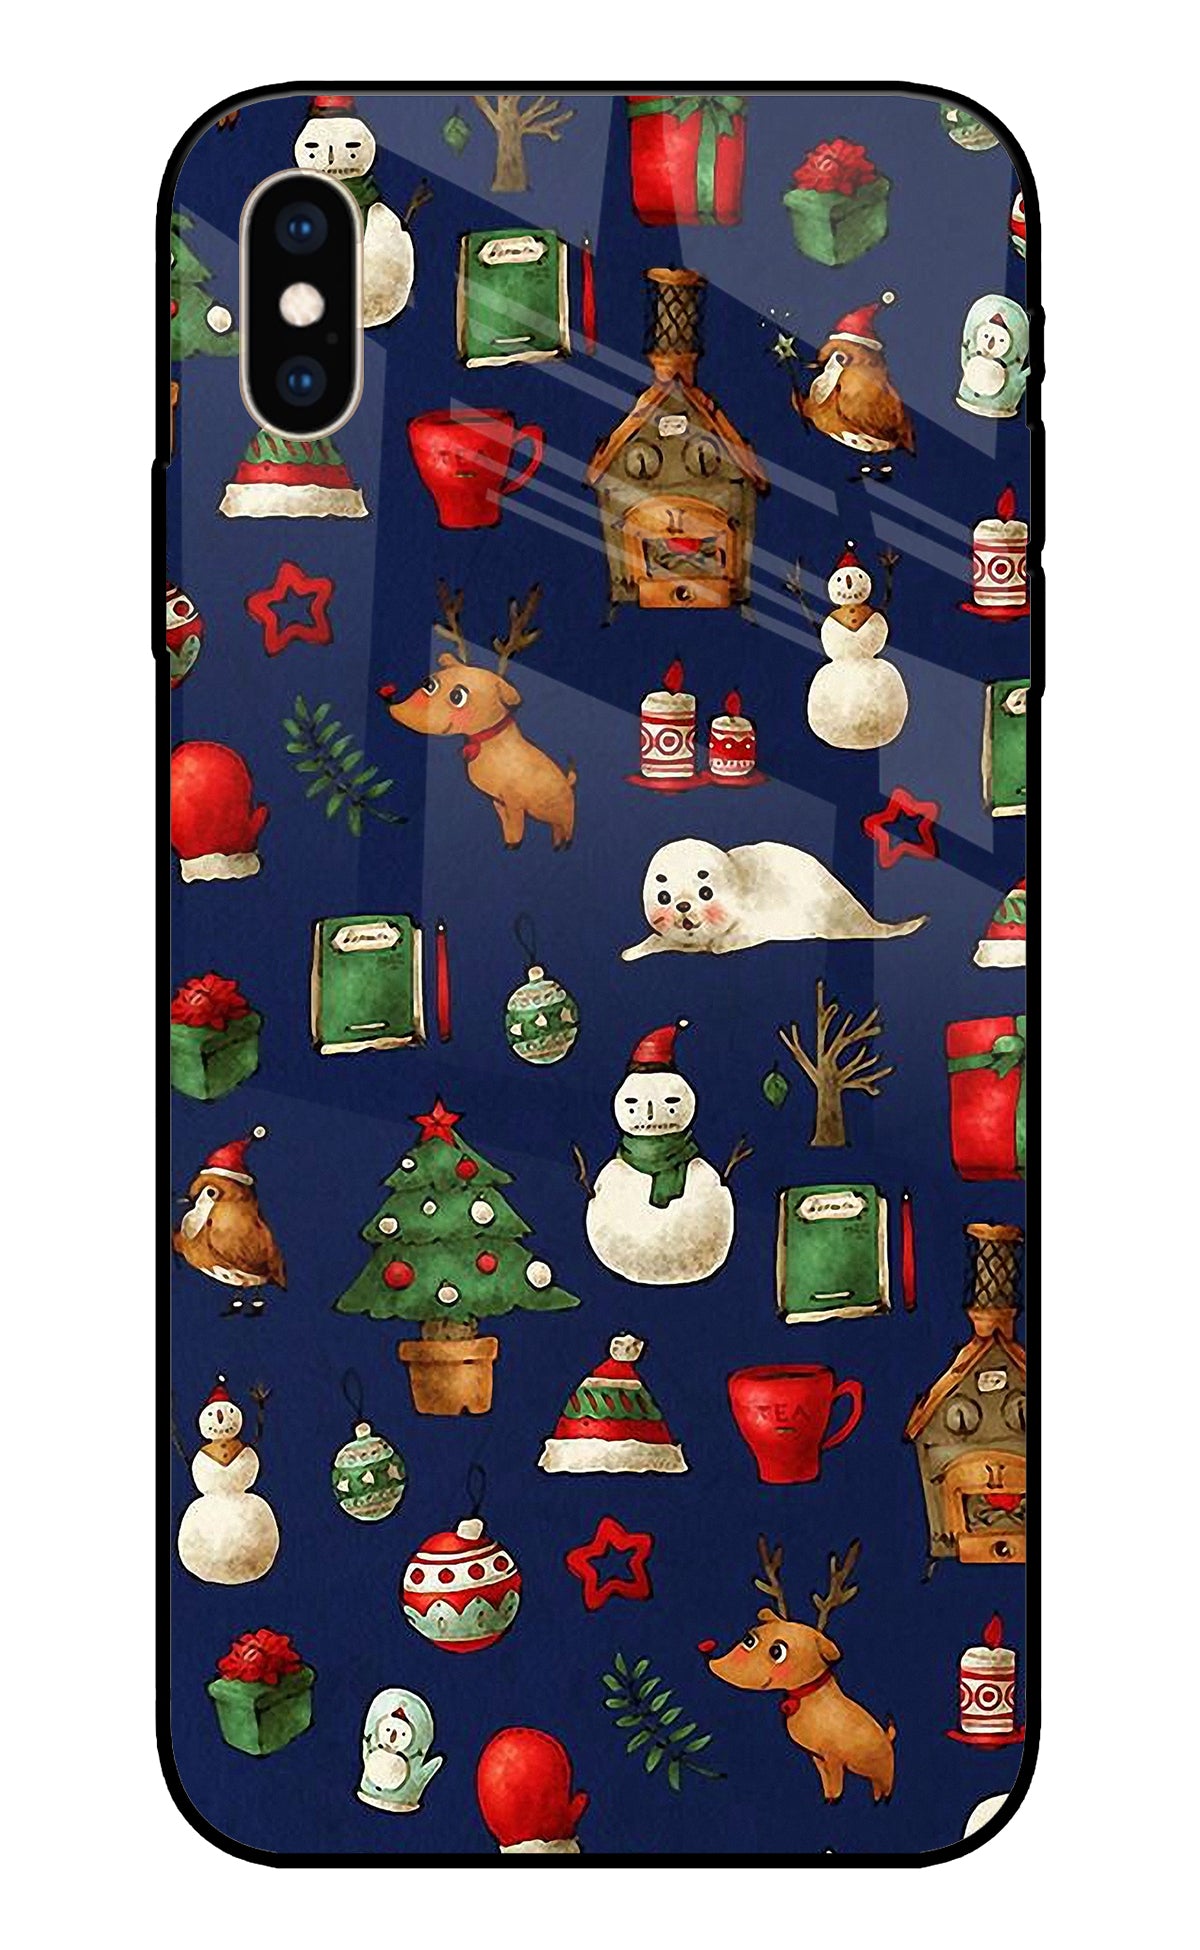 Canvas Christmas Print iPhone XS Max Glass Cover